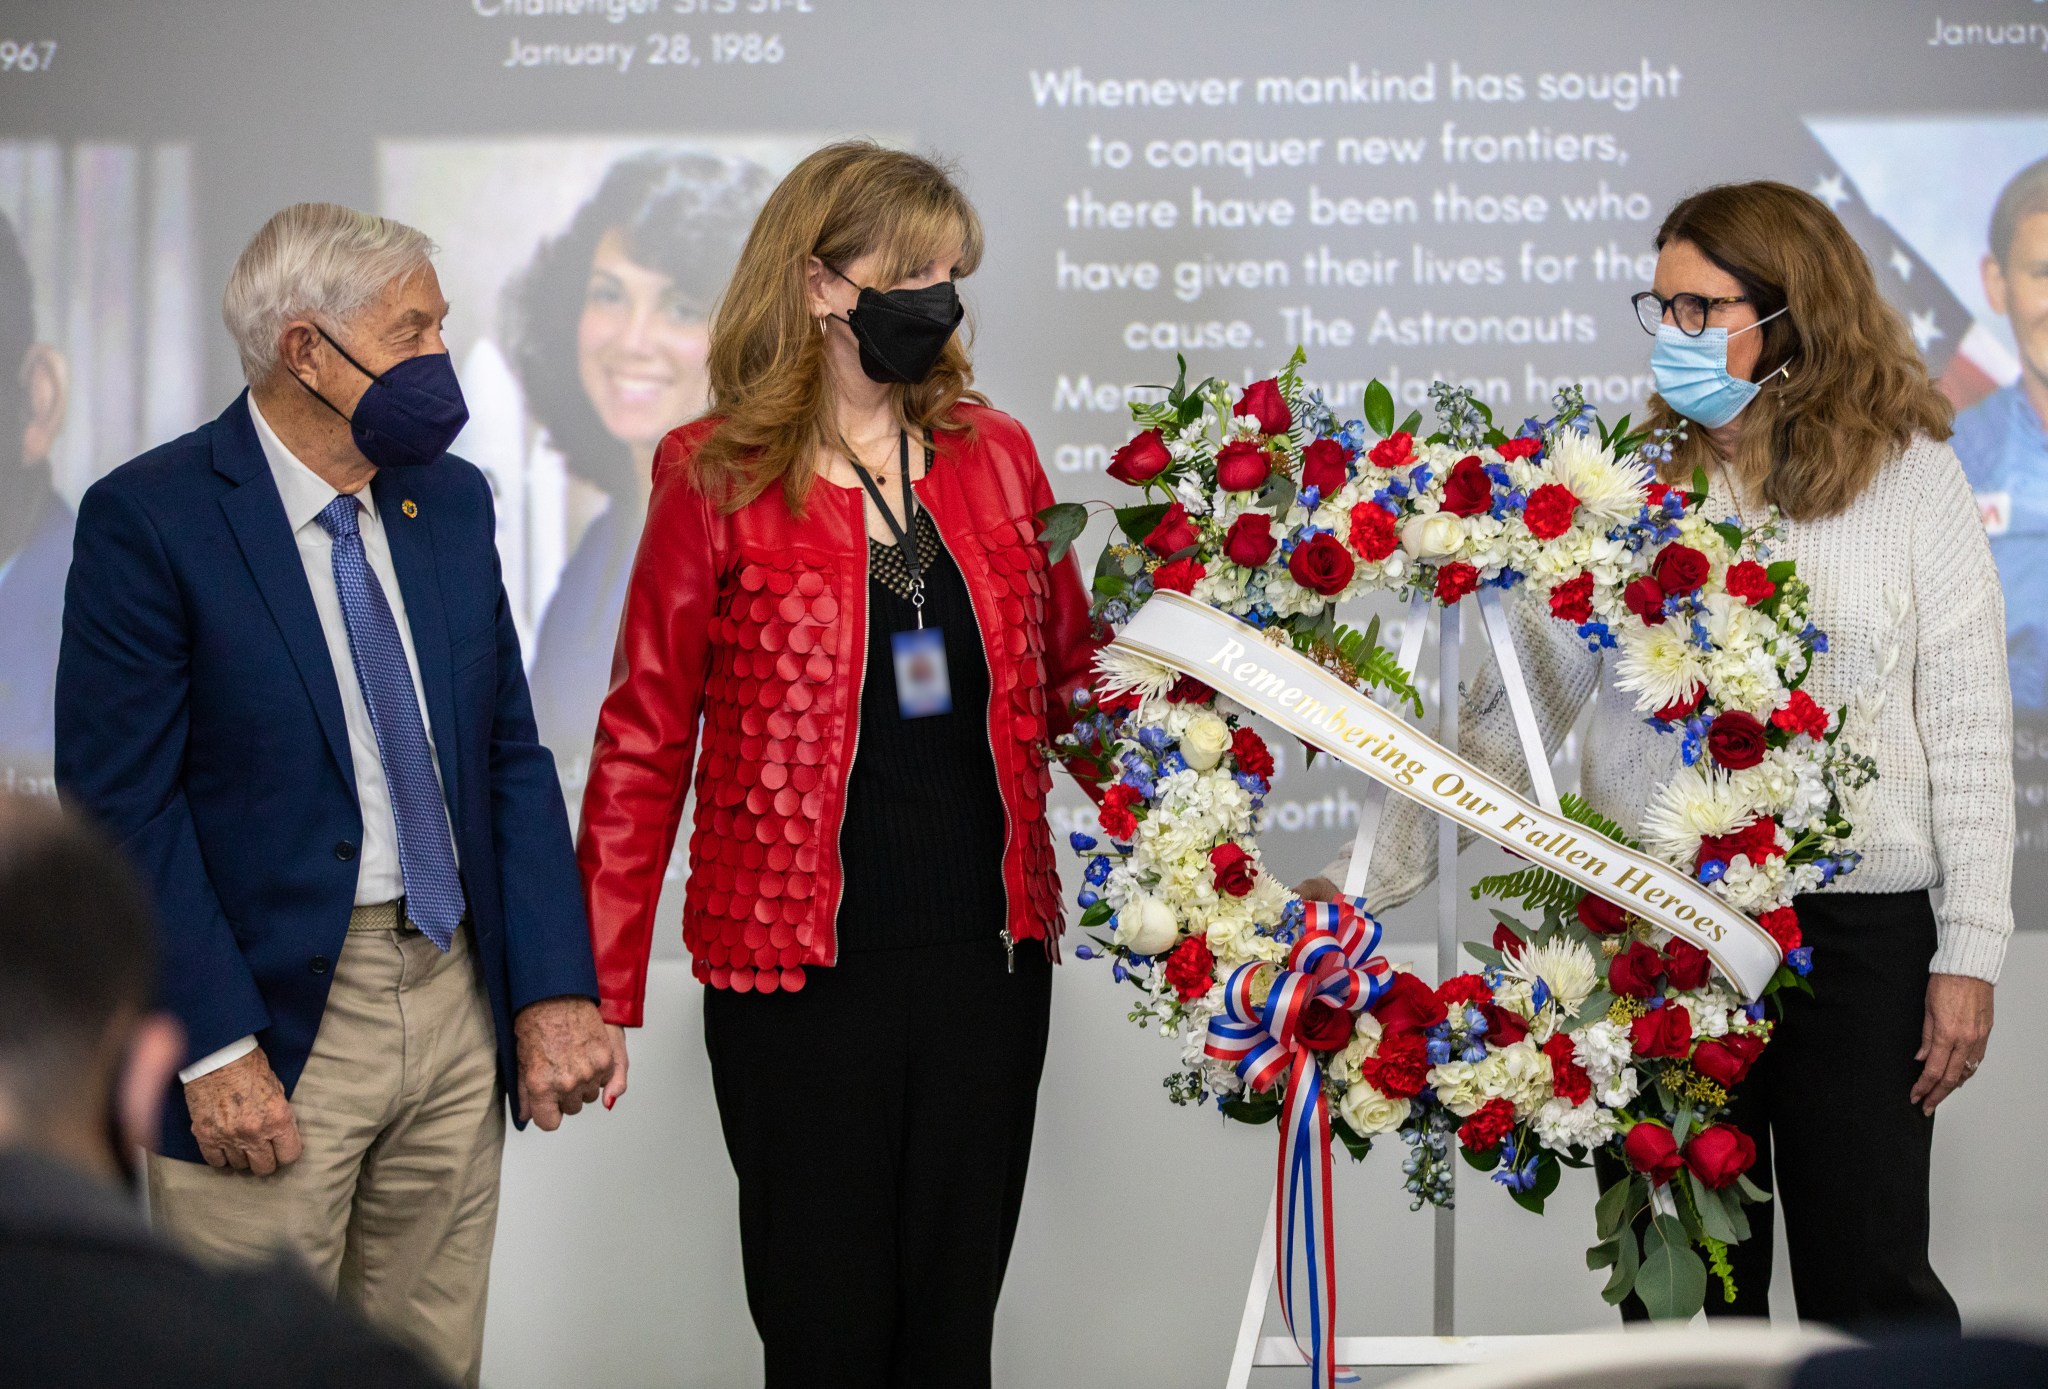 Relatives of fallen astronauts place a wreath in front of on-screen images of those  who perished in the pursuit of space exploration during the Day of Remembrance on Jan. 27, 2022 at Kennedy Space Center in Florida.